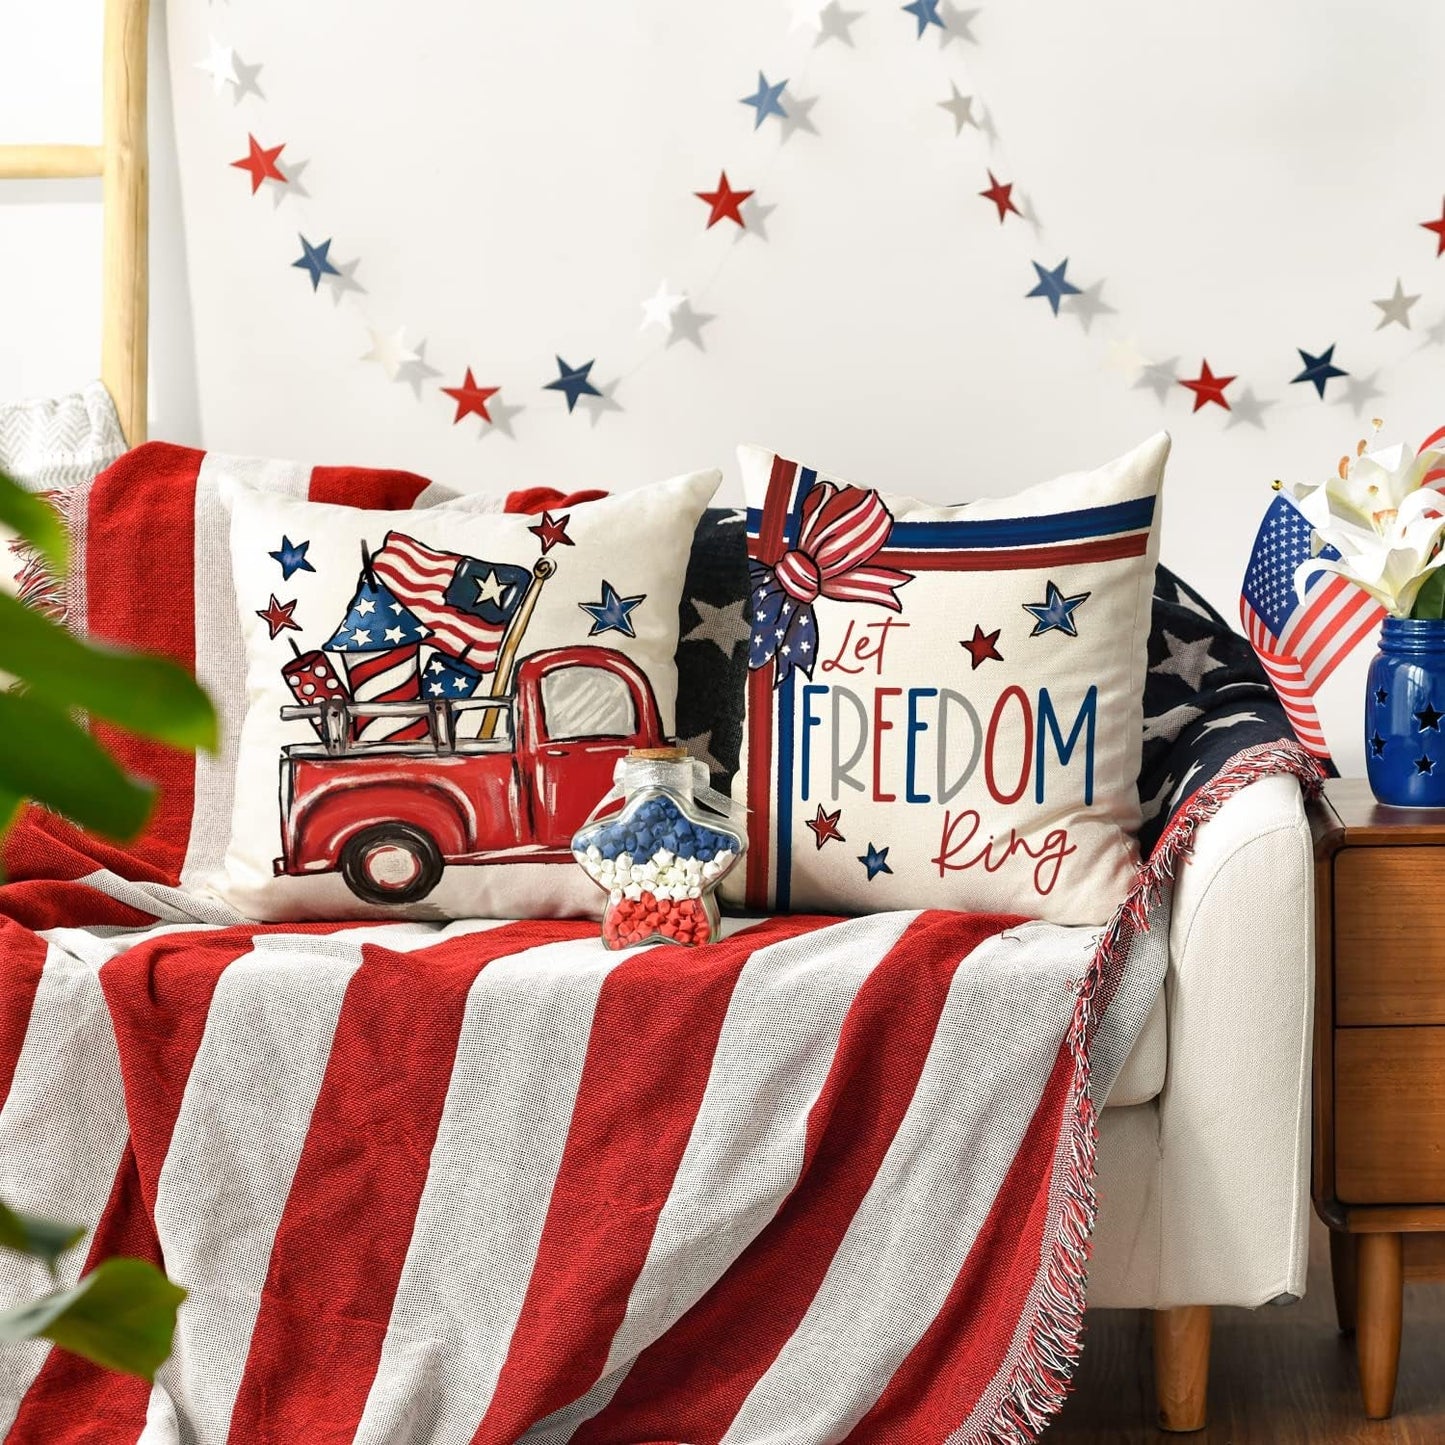 AVOIN Colorlife America the Beautiful Let Freedom Ring Throw Pillow Covers, 18 X 18 Inch Freedom 4Th of July Independence Memorial Day Patriotic Cushion Case for Sofa Couch Set of 4